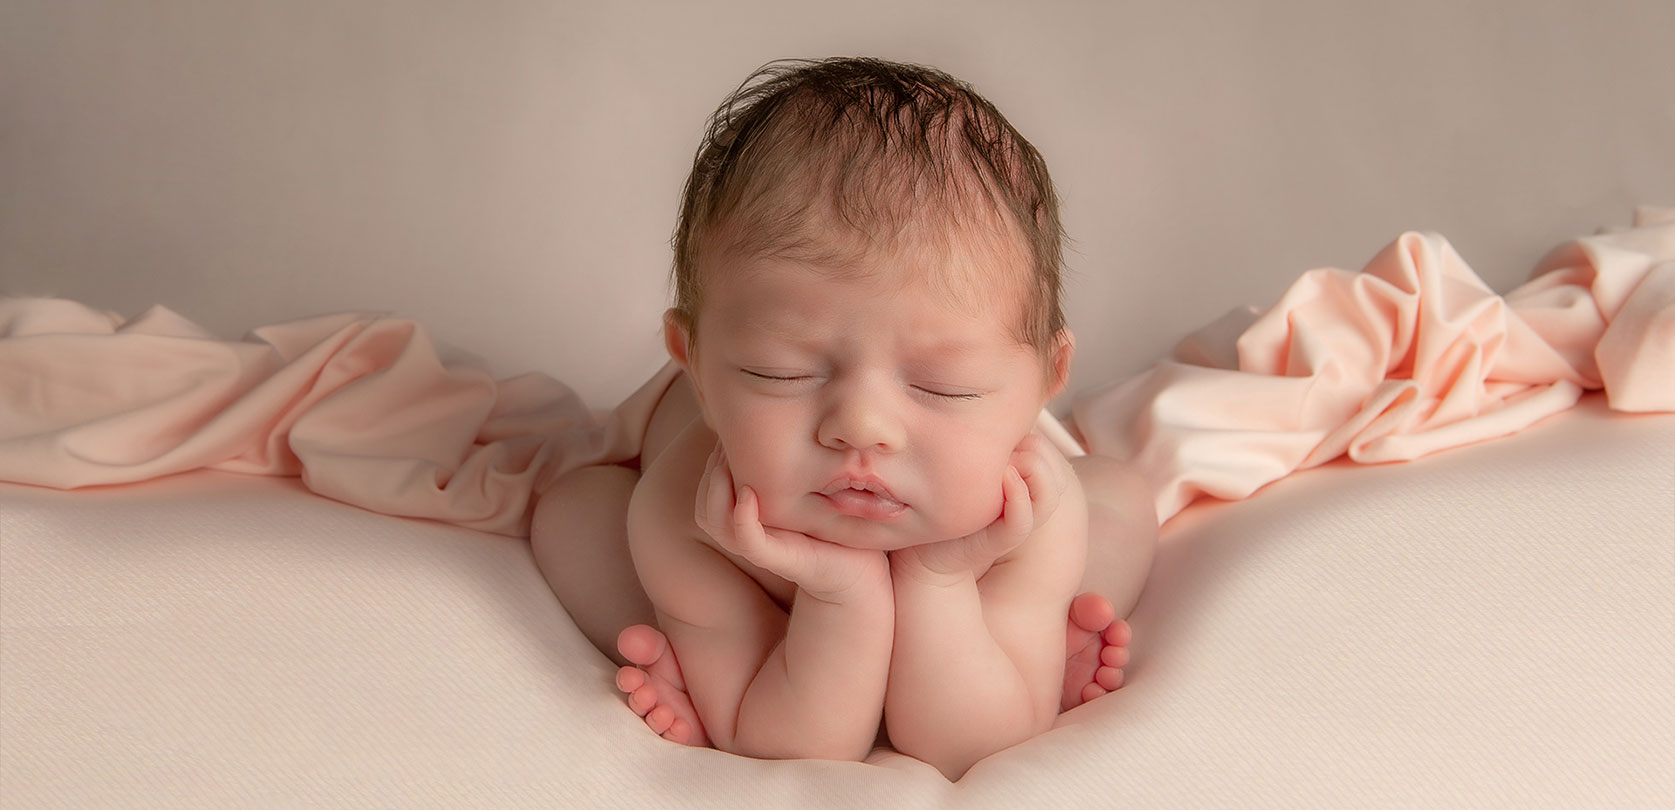 Newborn Photography Special Offers for Scotland